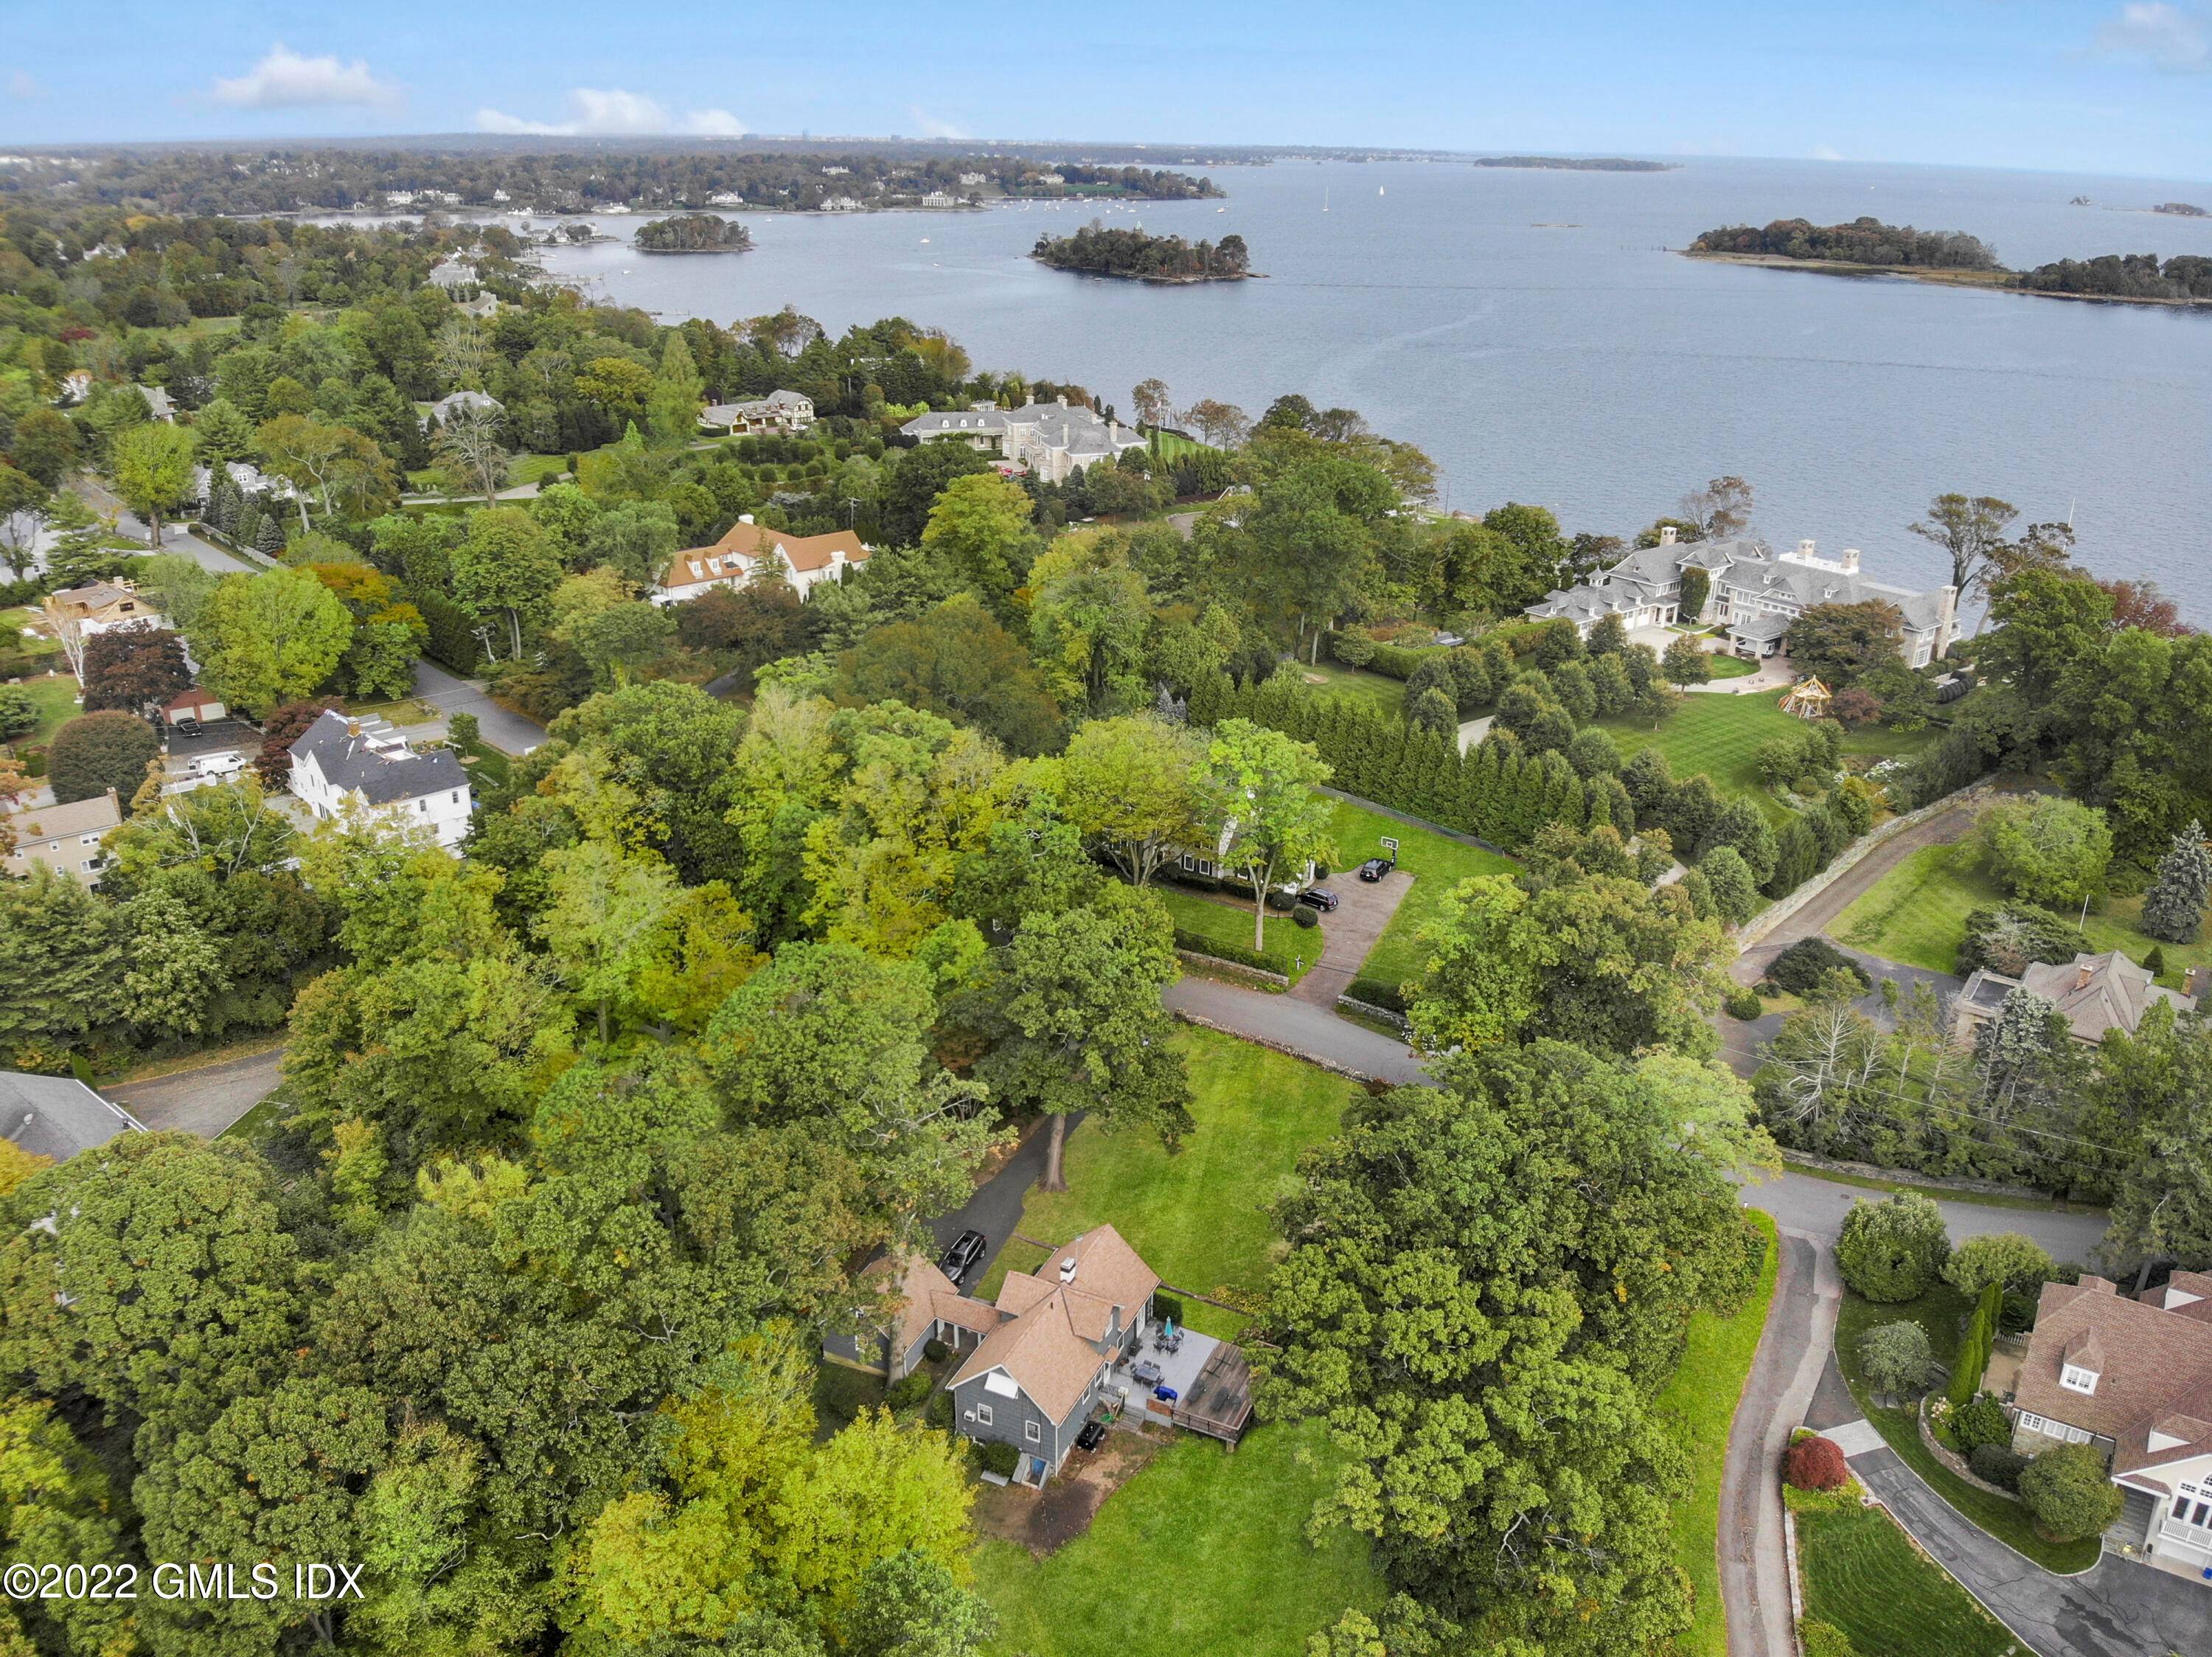 Waterfront home with possibilities to build a new home on prestigious Byram Shore Road.